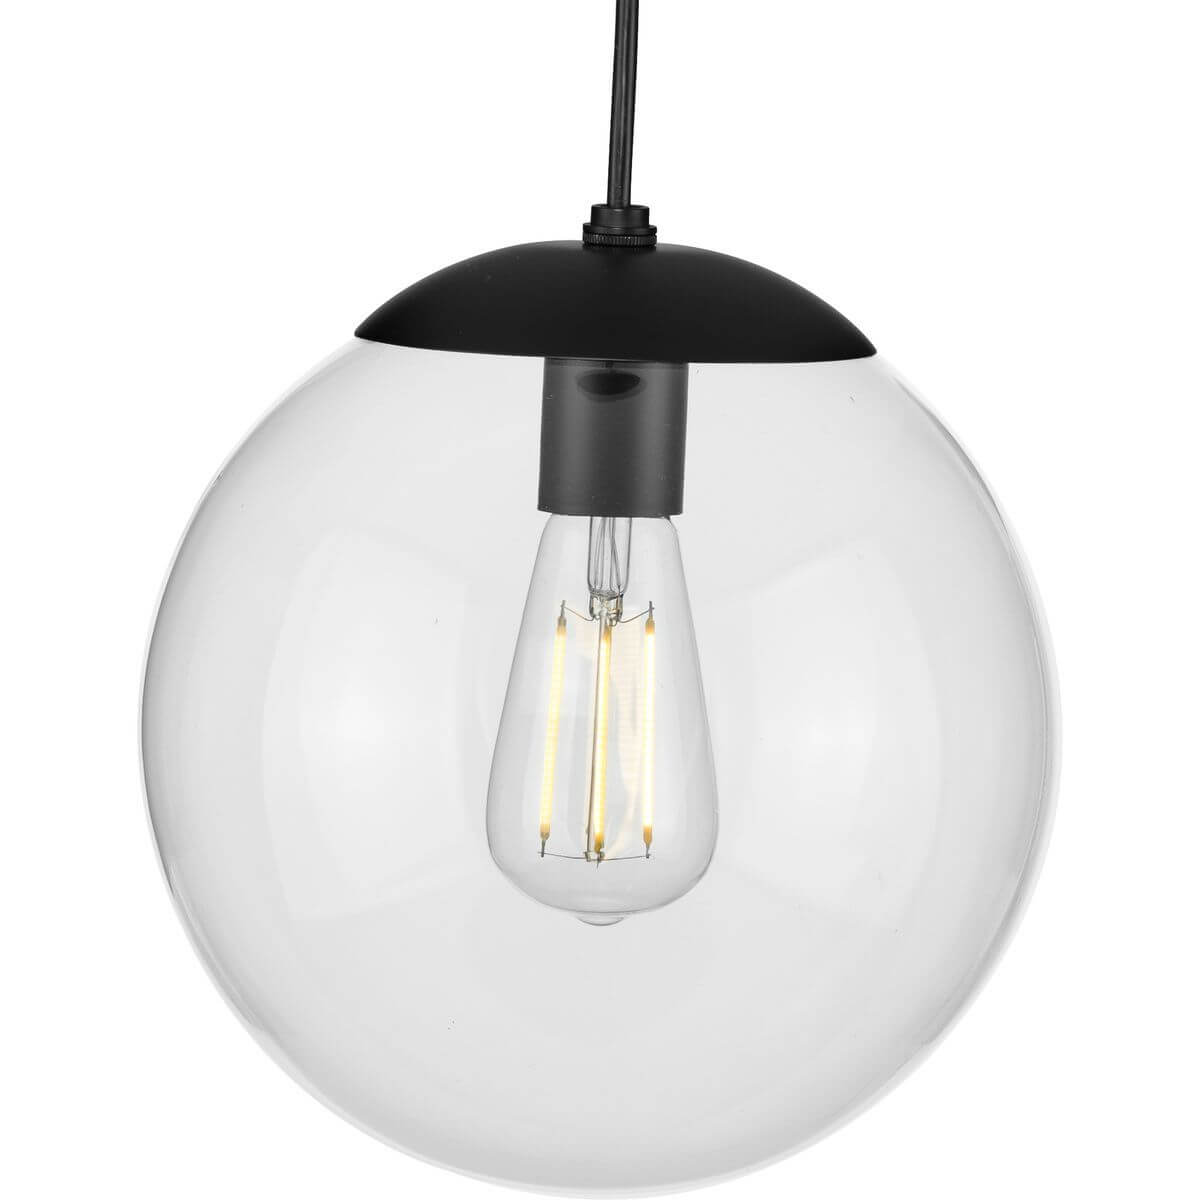 Progress Lighting Atwell 1 Light 10 inch Pendant in Matte Black with Clear Glass P500310-031